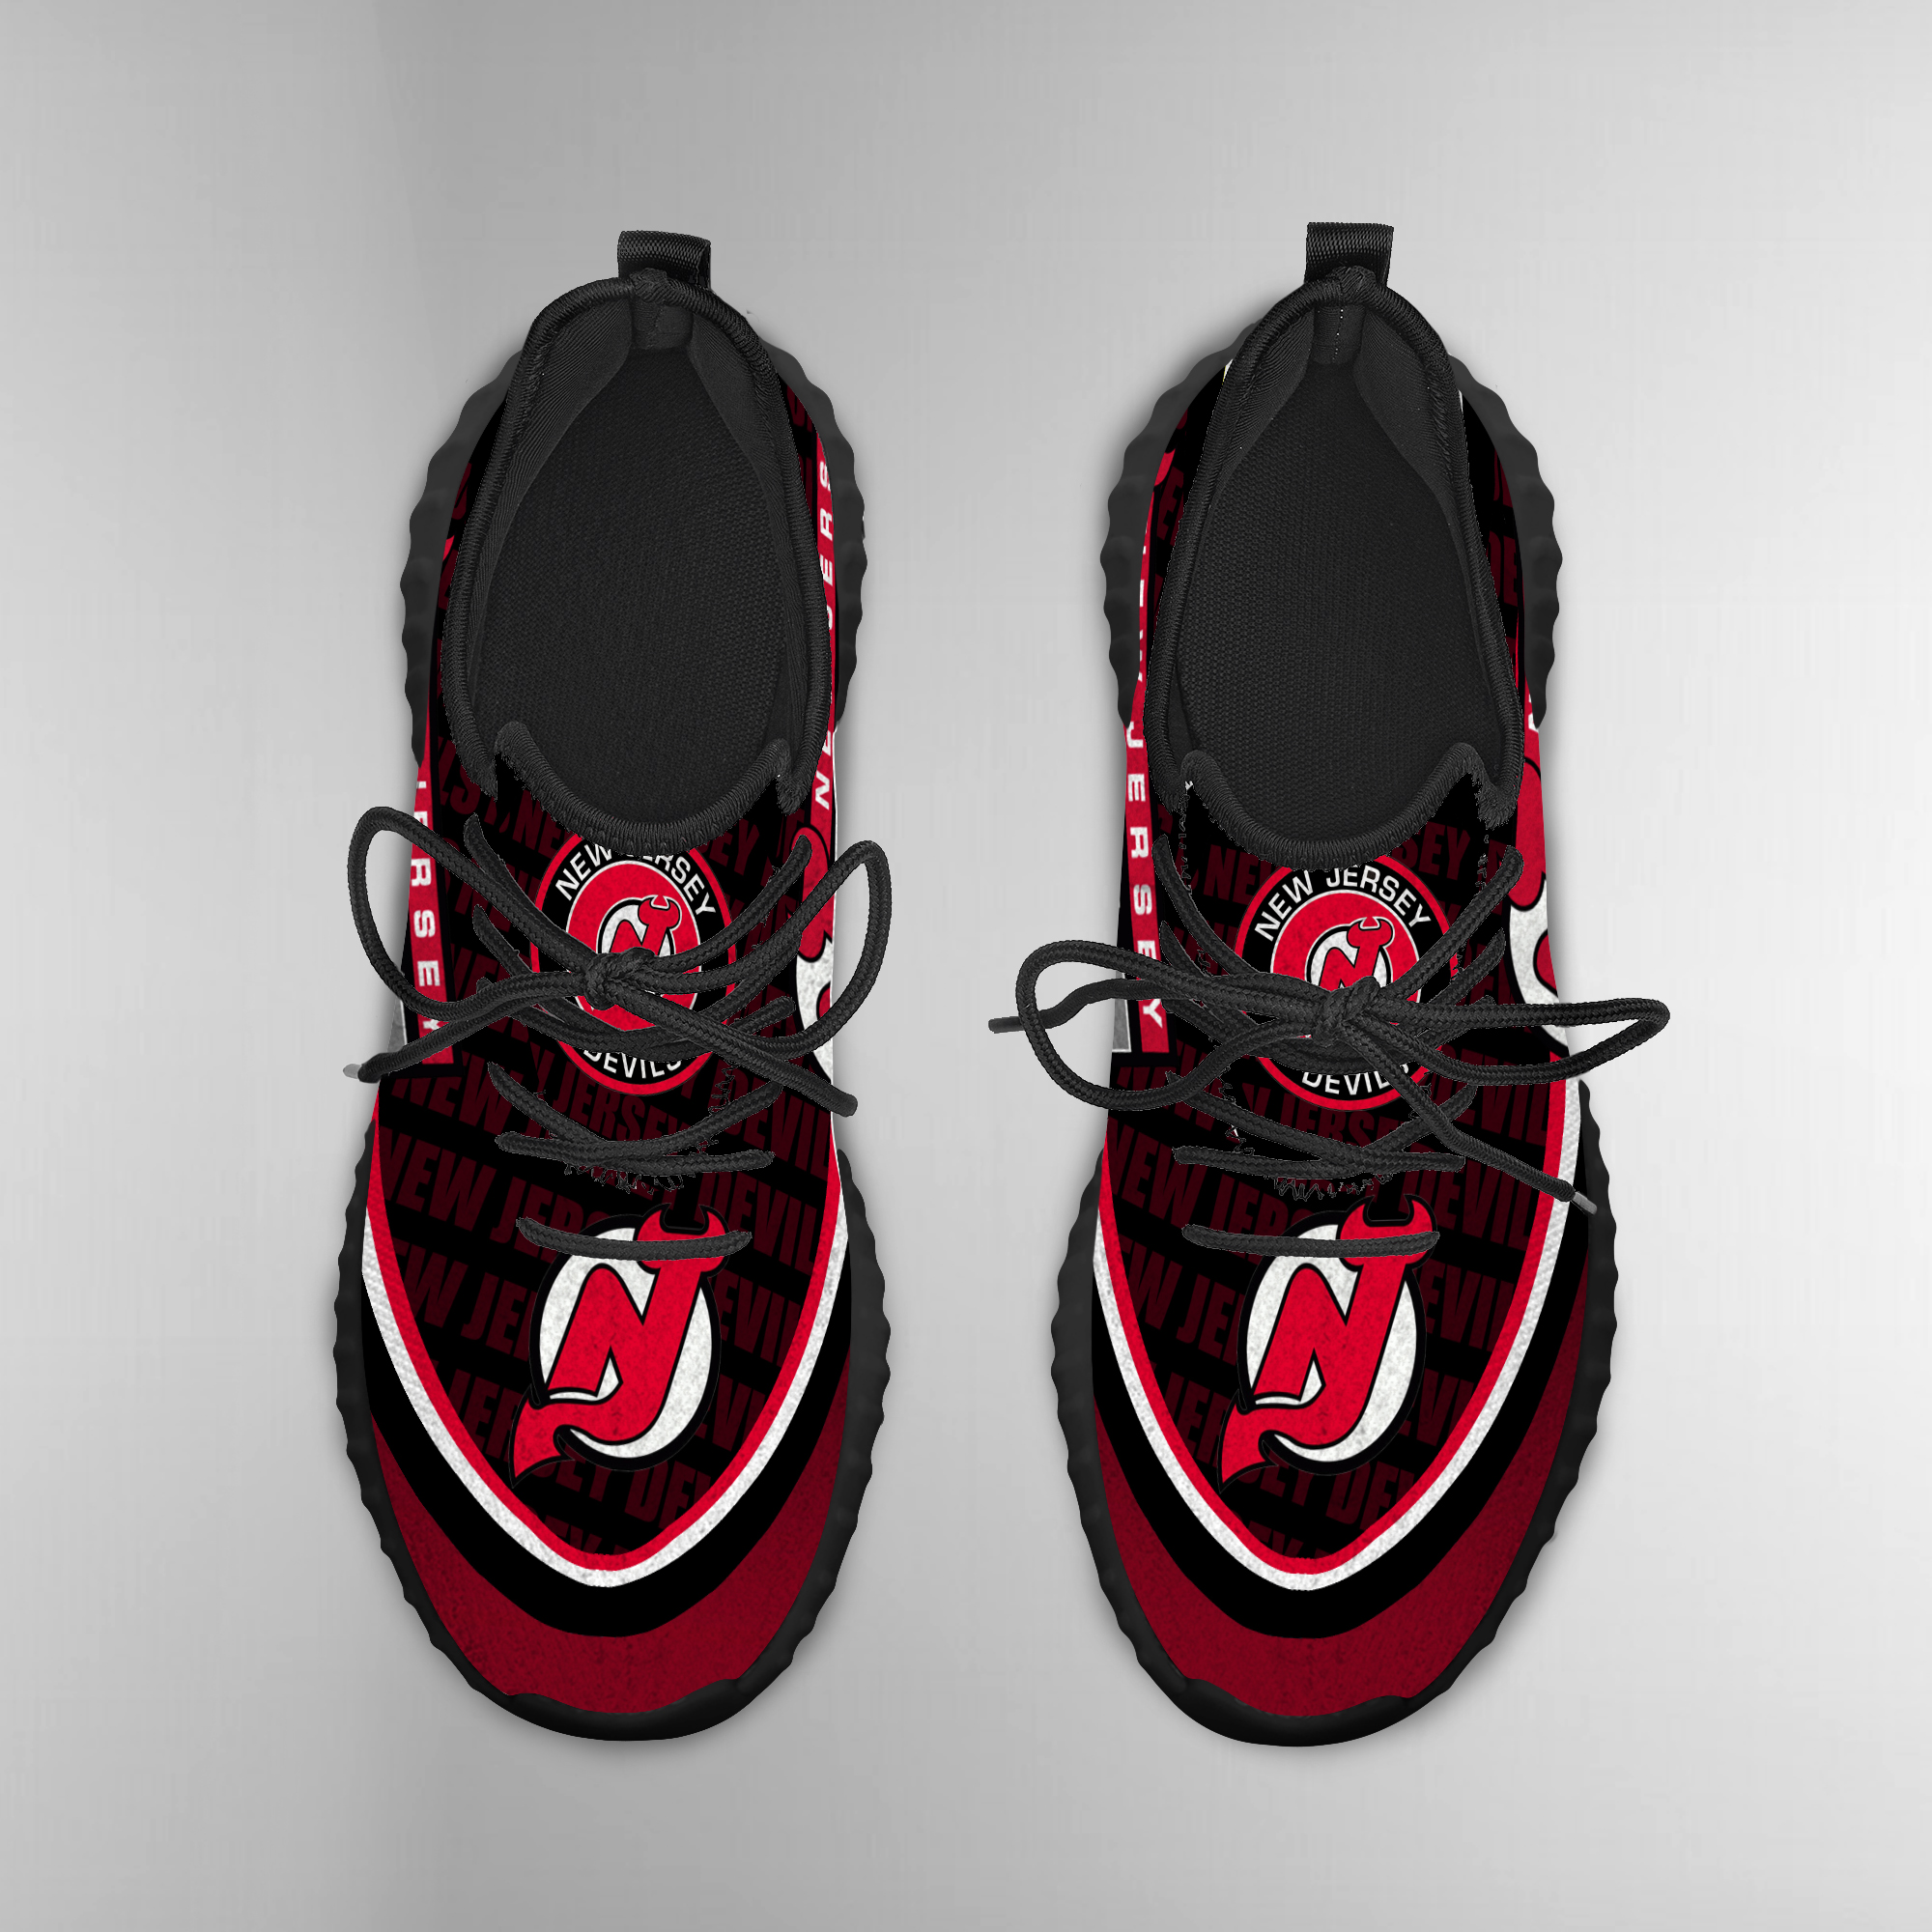 New Jersey Devils Hockey Yeezy Shoes